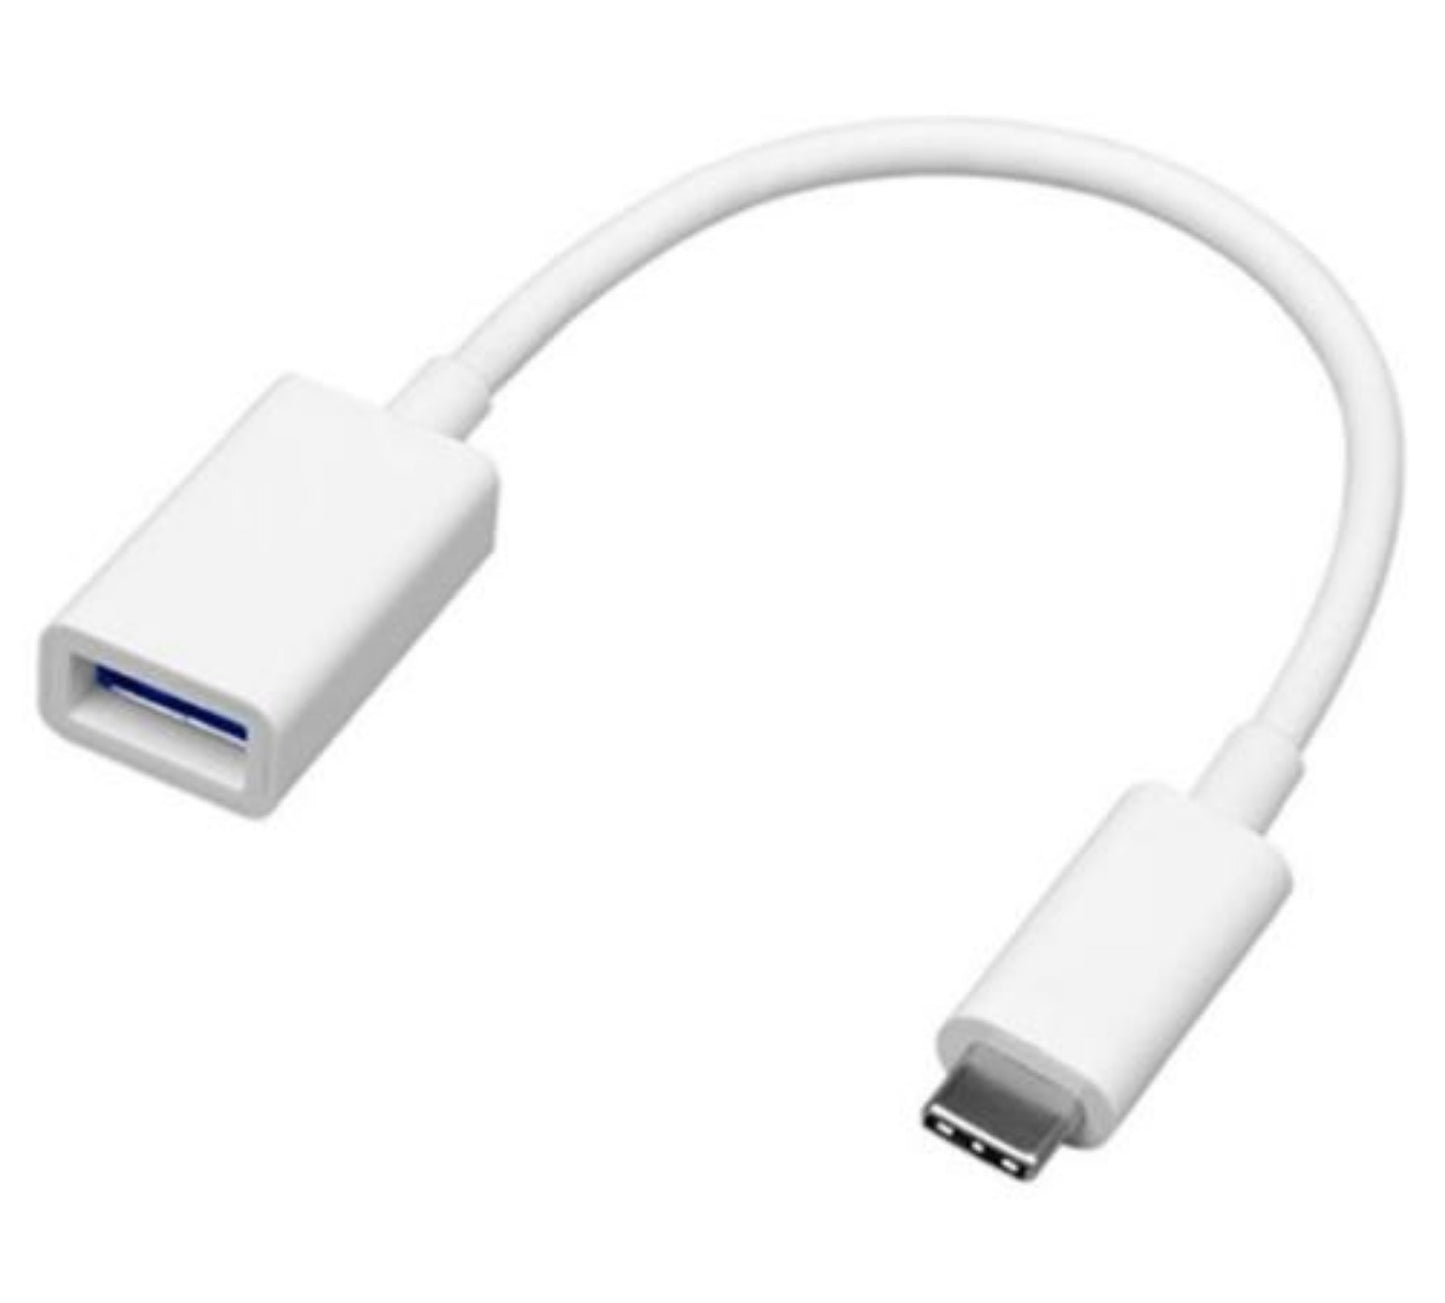 USB On-The-Go adapter for Type-C devices